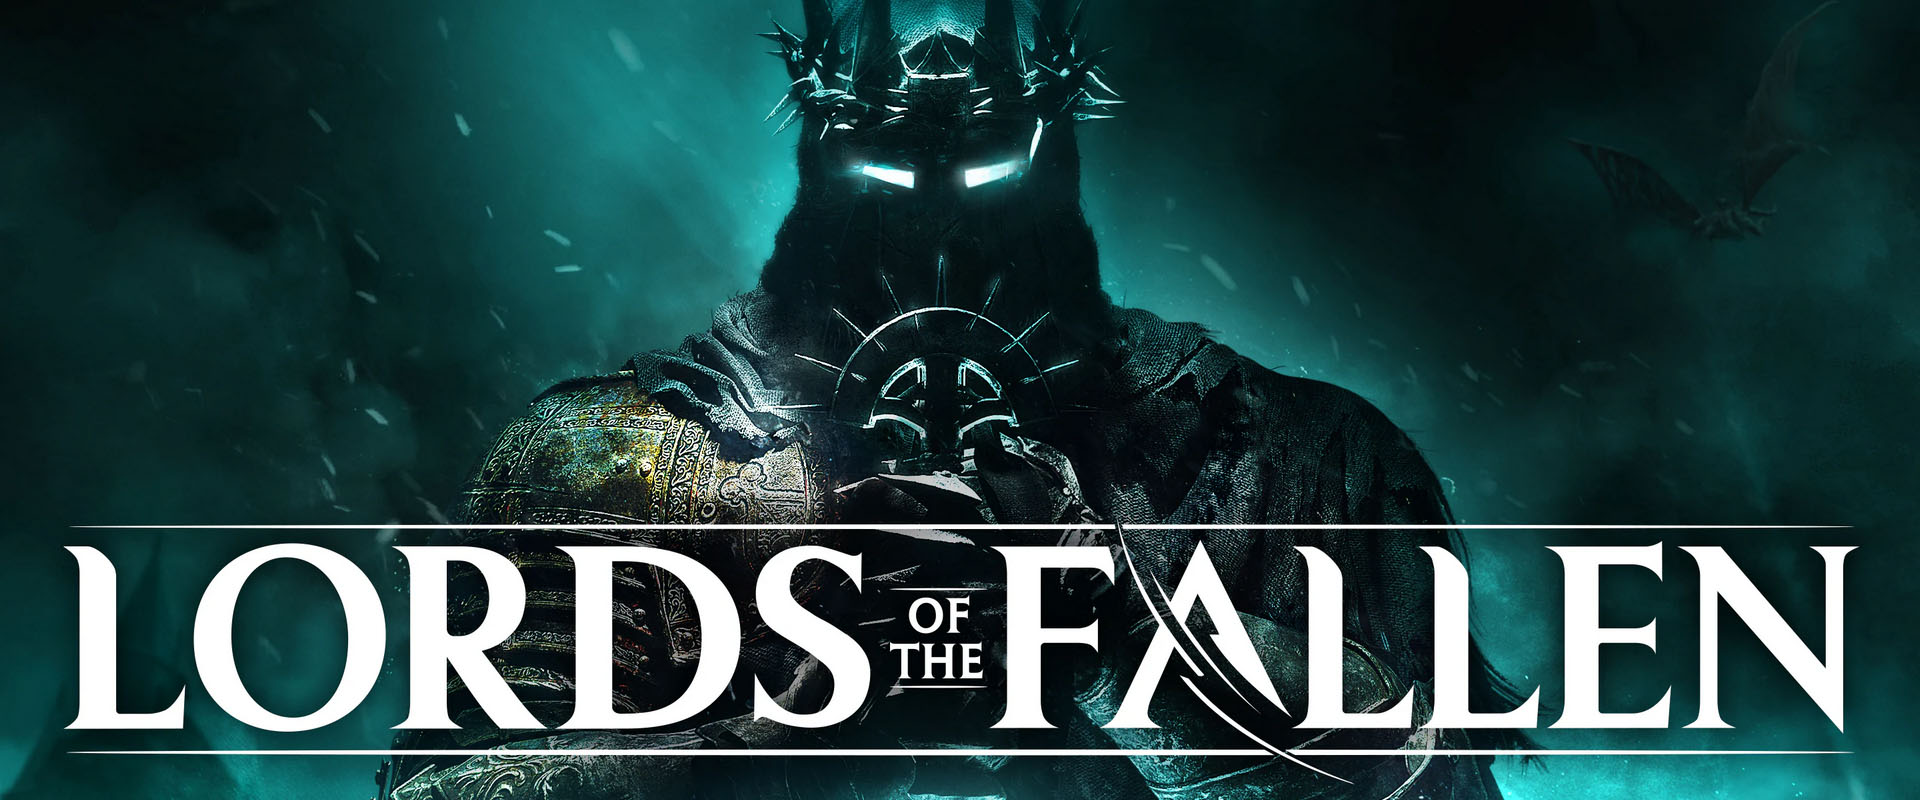 "Lords of the Fallen"